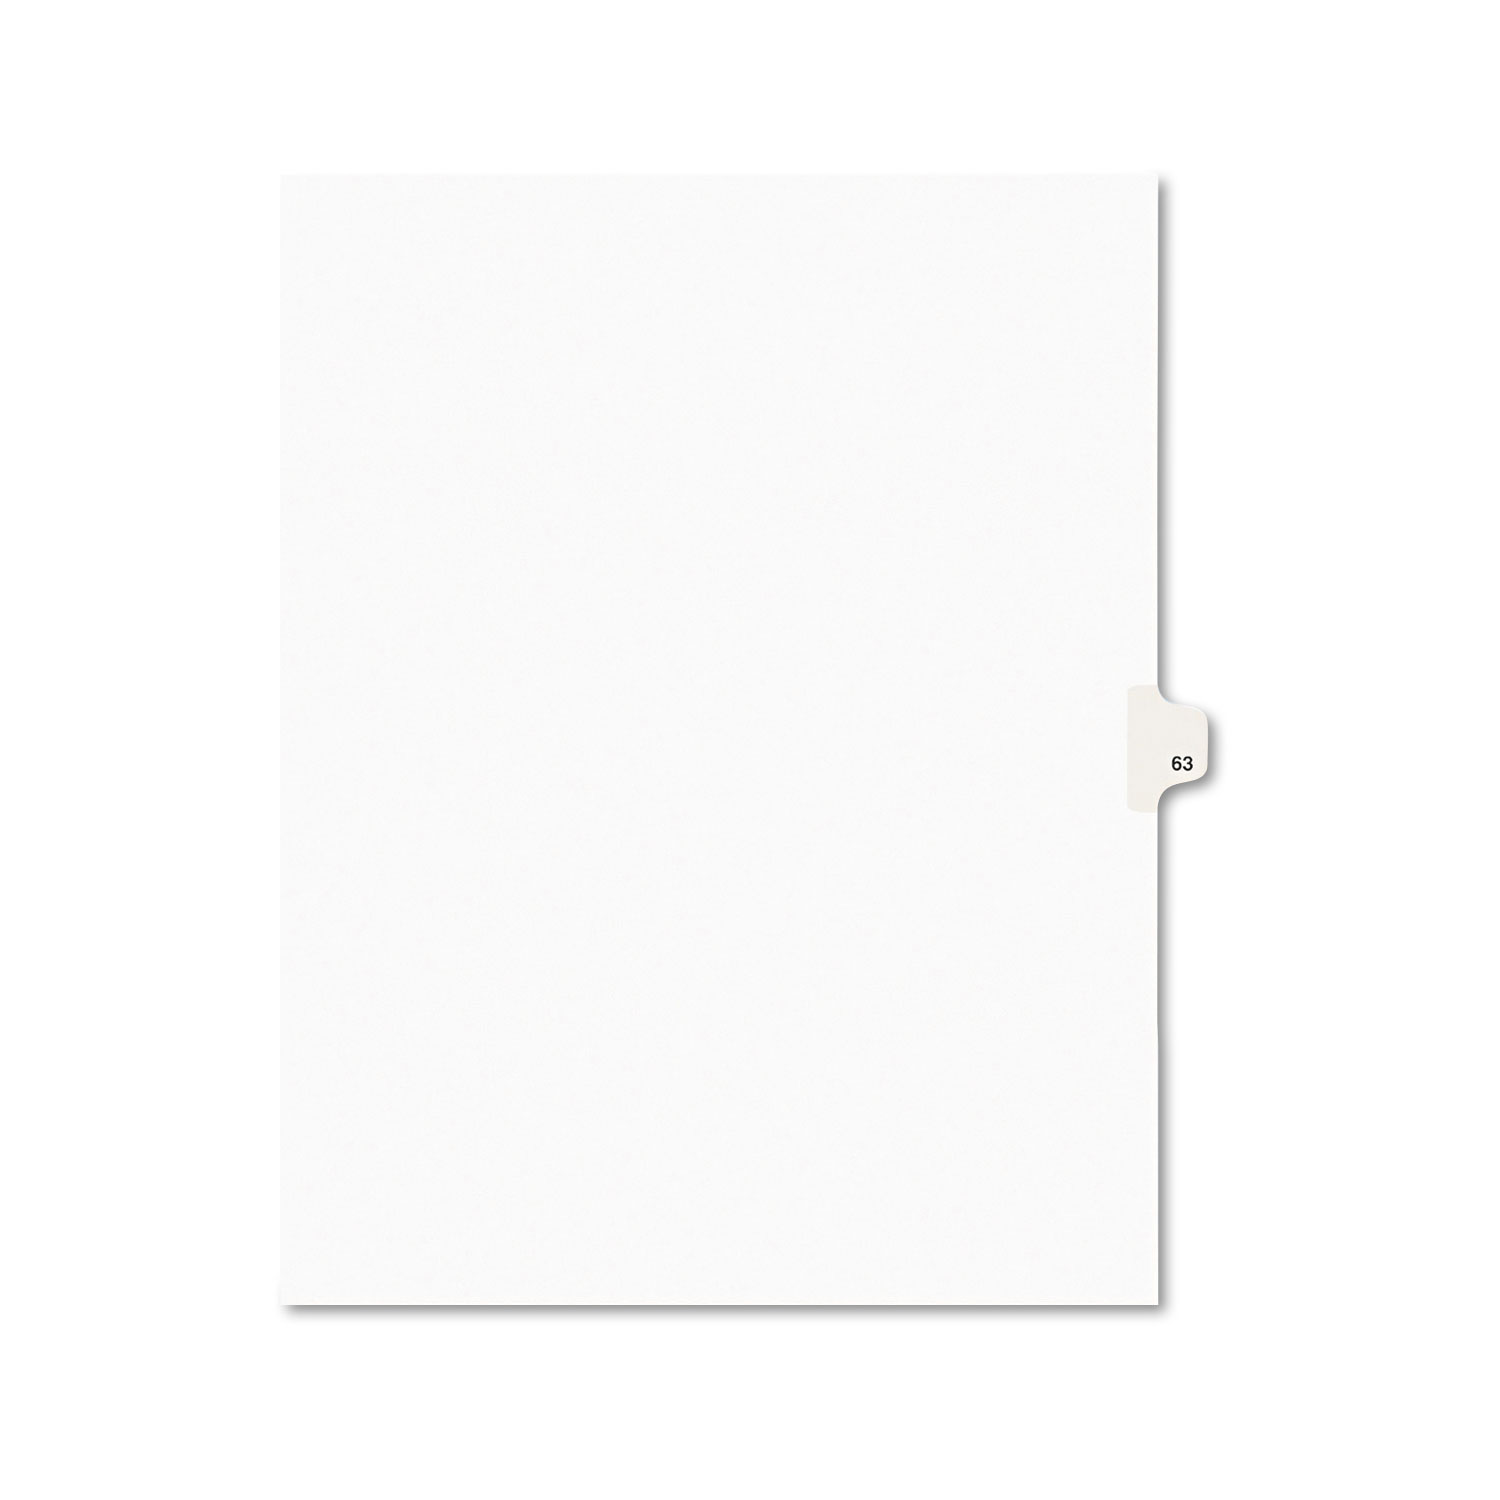  Avery 01063 Preprinted Legal Exhibit Side Tab Index Dividers, Avery Style, 10-Tab, 63, 11 x 8.5, White, 25/Pack (AVE01063) 